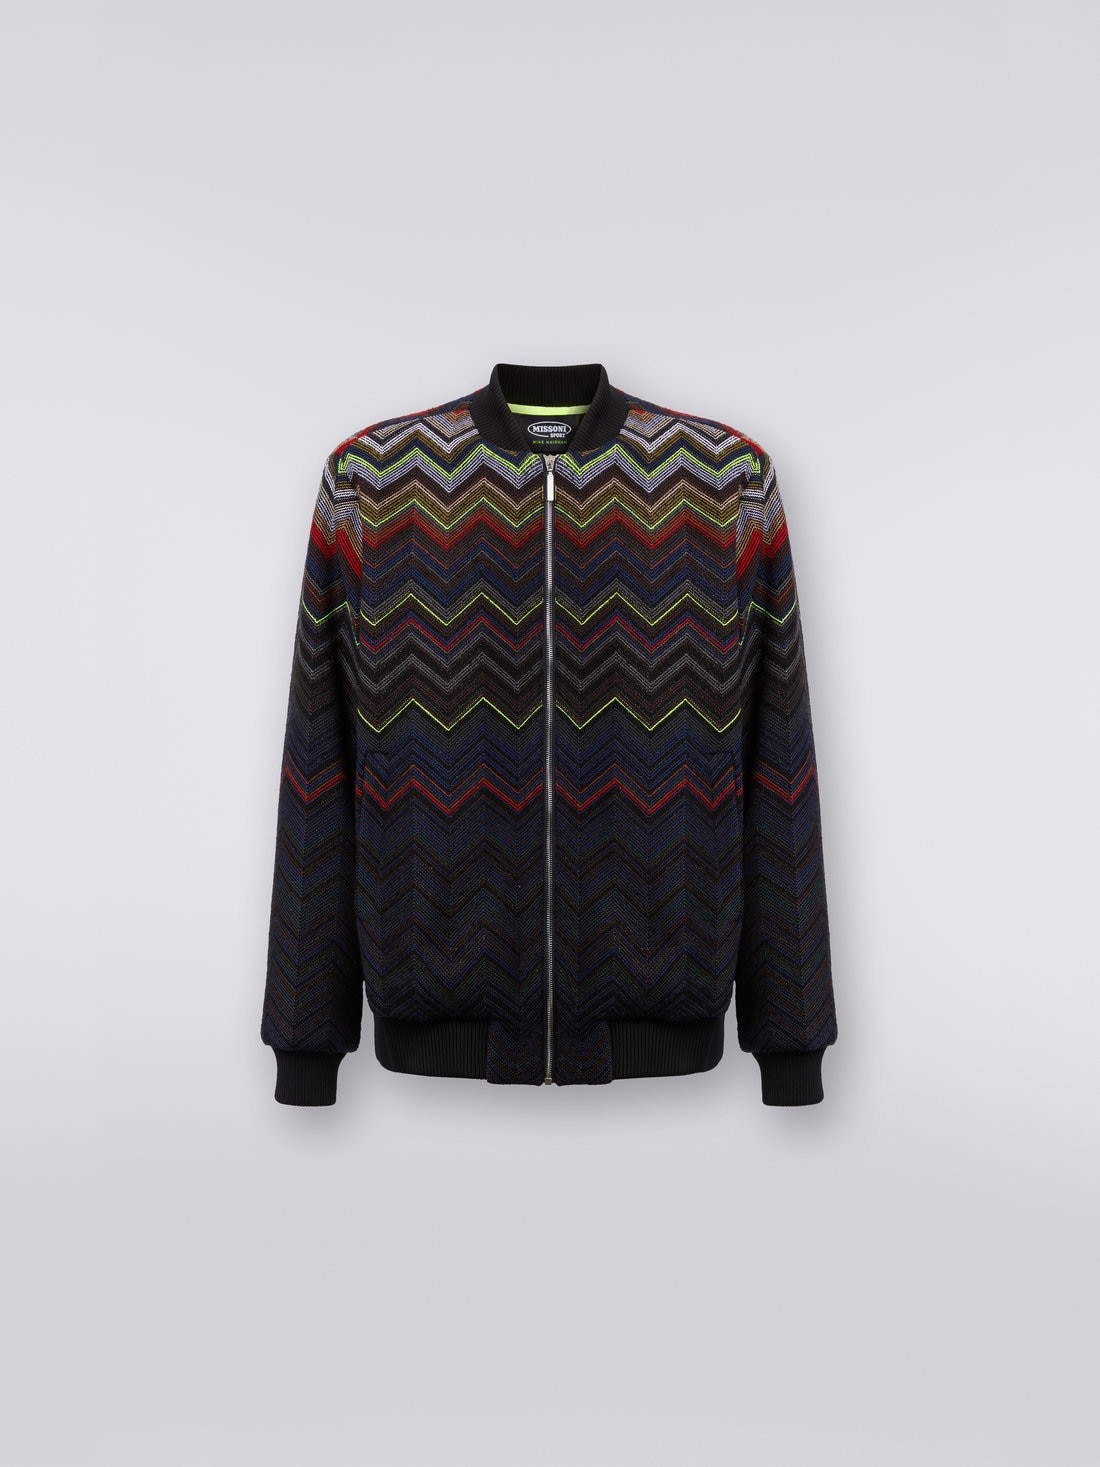 Wool and cotton blend chevron bomber jacket in collaboration with Mike Maignan, Multicoloured - 0